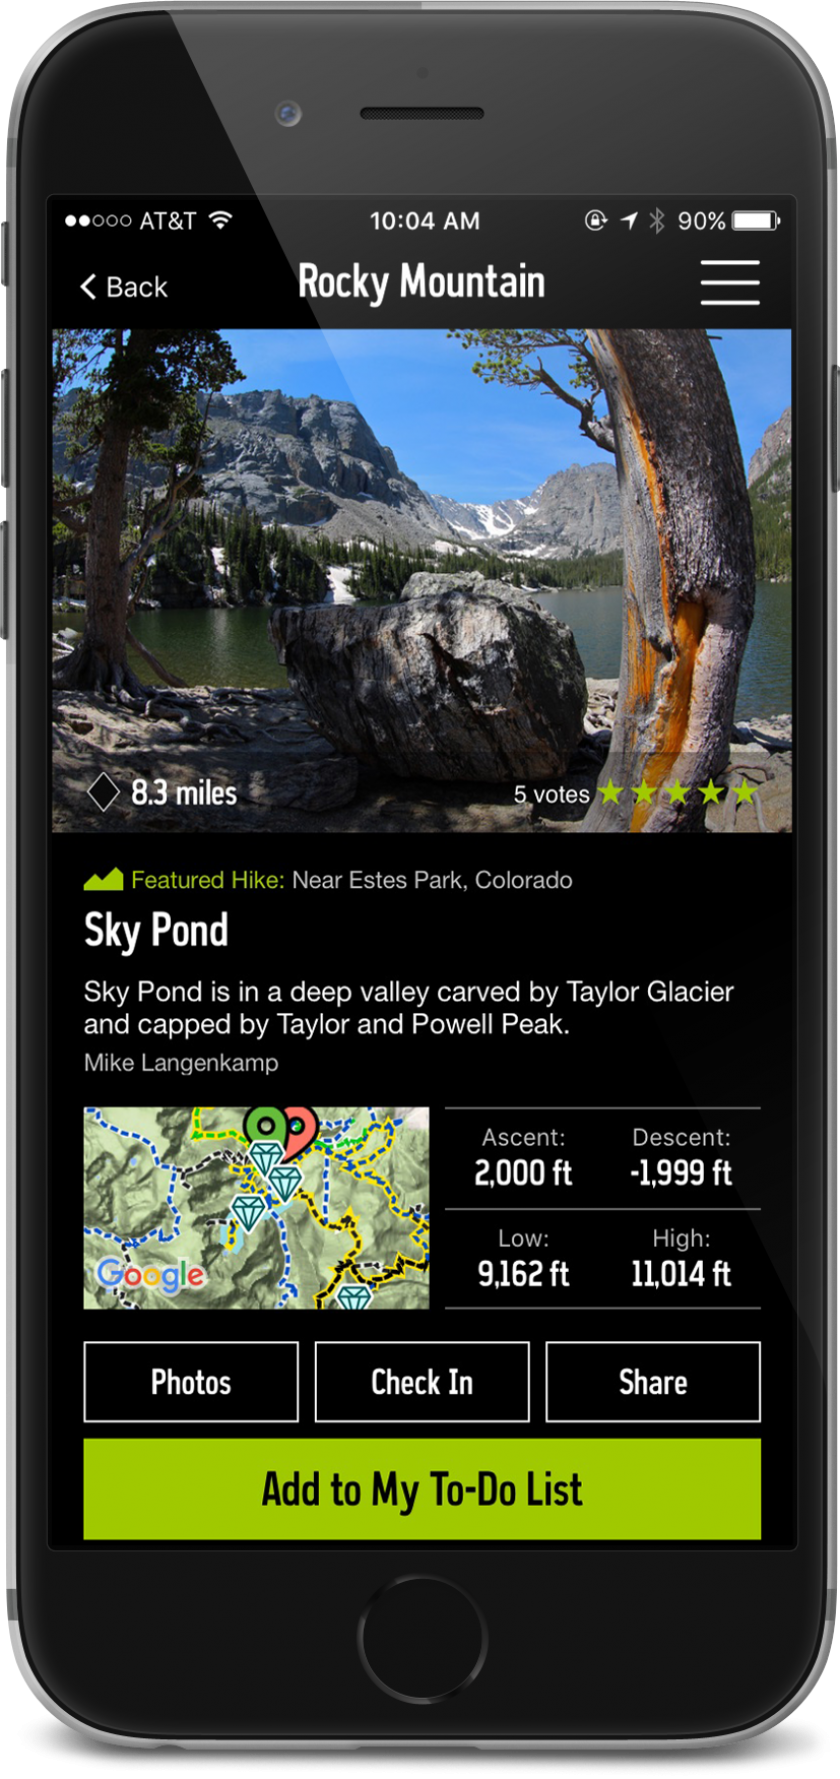 Image of iPhone with the REI Co-op Guide to National Parks App on screen; features data and descriptions of Rocky Mountain park 